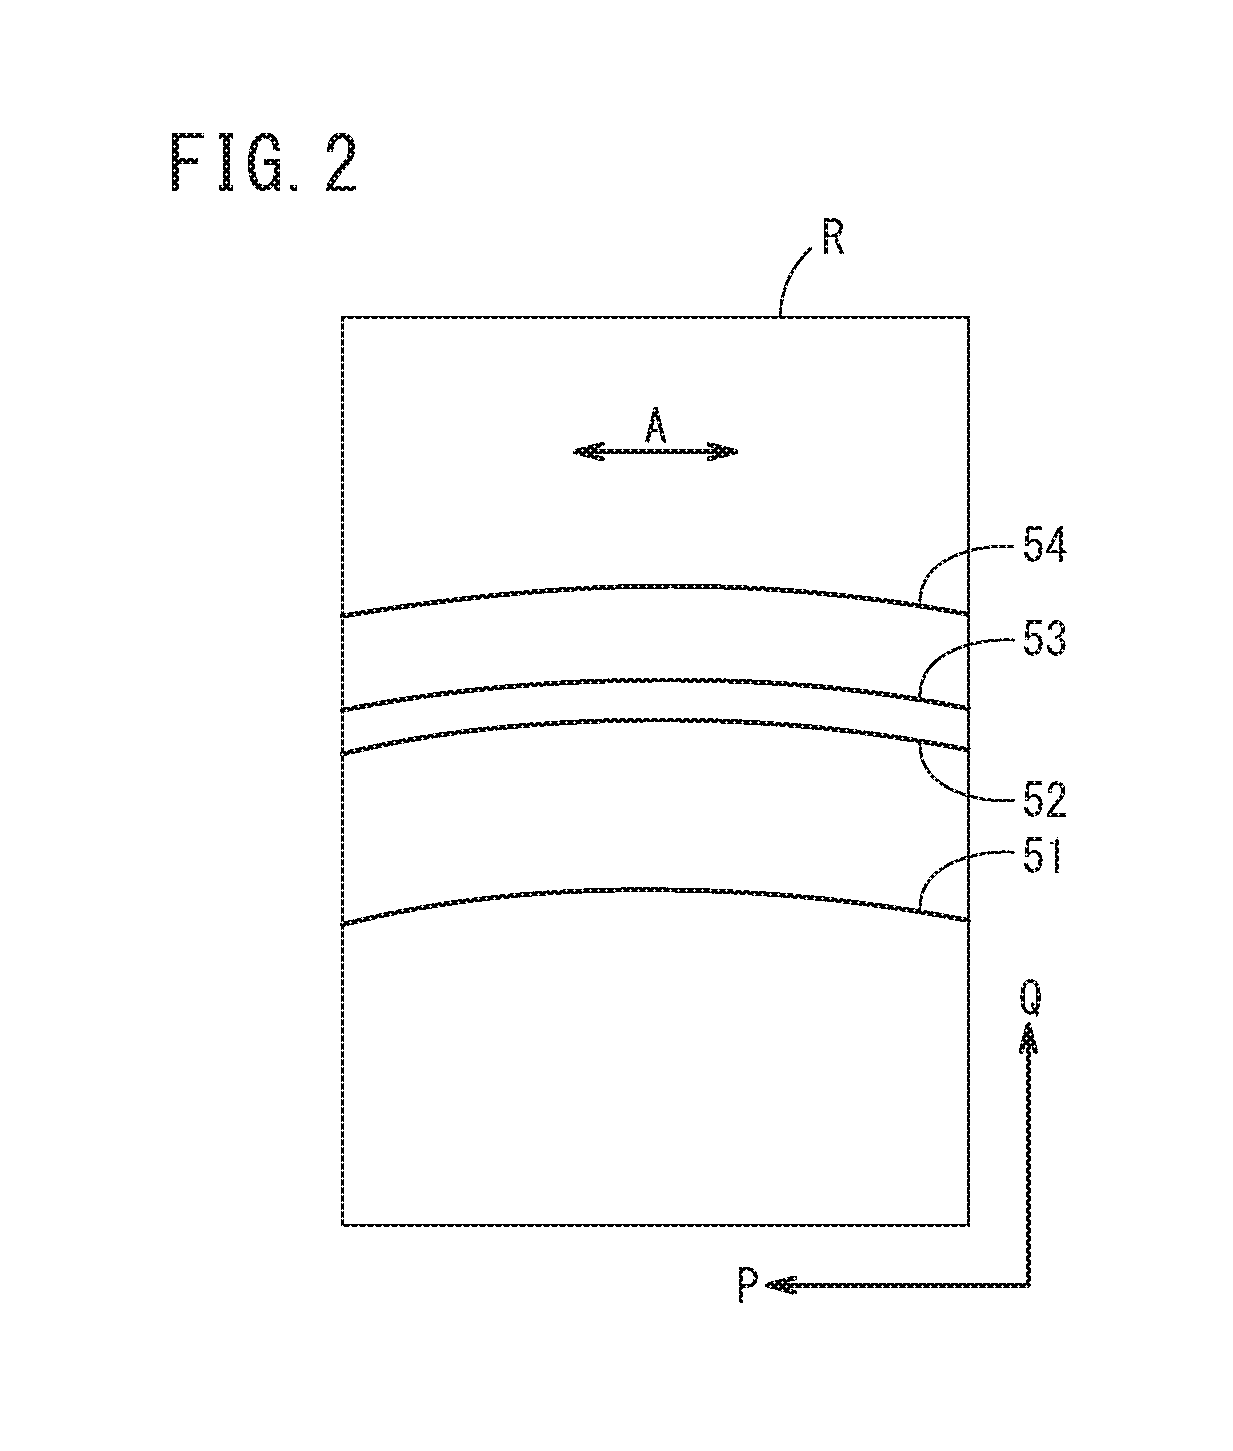 X-ray diffraction measurement method and apparatus